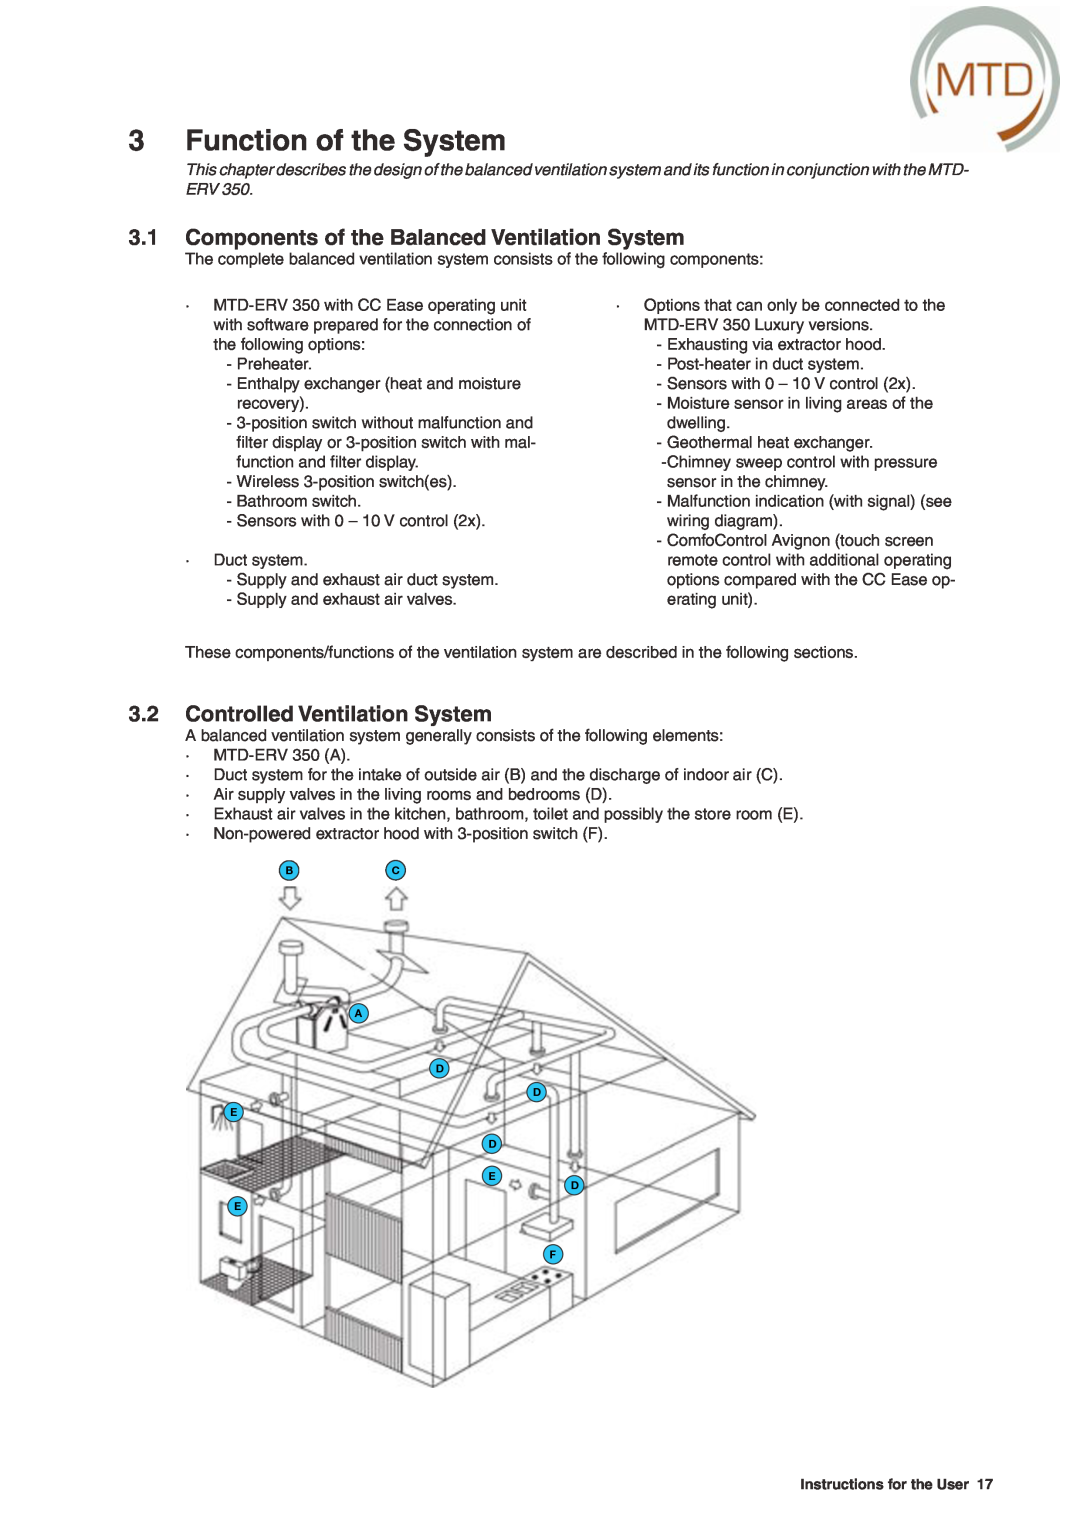 MTD ERV 350, ERV 365 Function of the System, Components of the Balanced Ventilation System, Controlled Ventilation System 